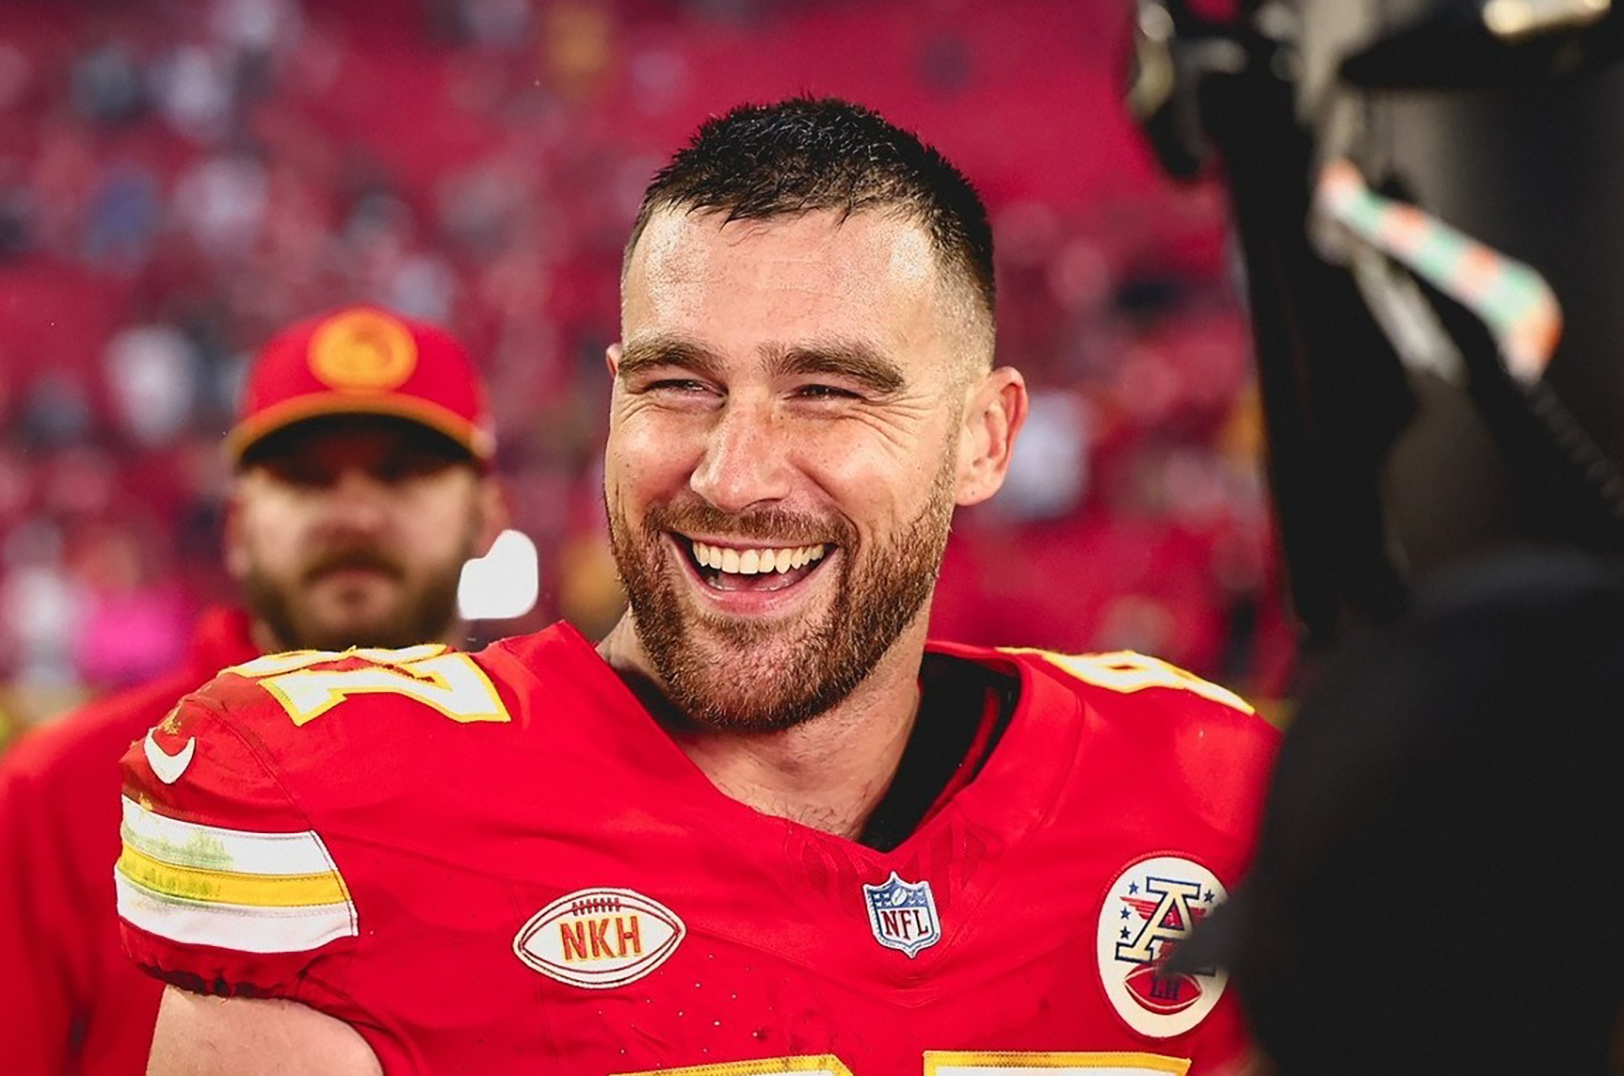 Call it ‘Swiftonomics’ in KC: Win or lose, Taylor Swift brought a smile to more than just Travis Kelce this season